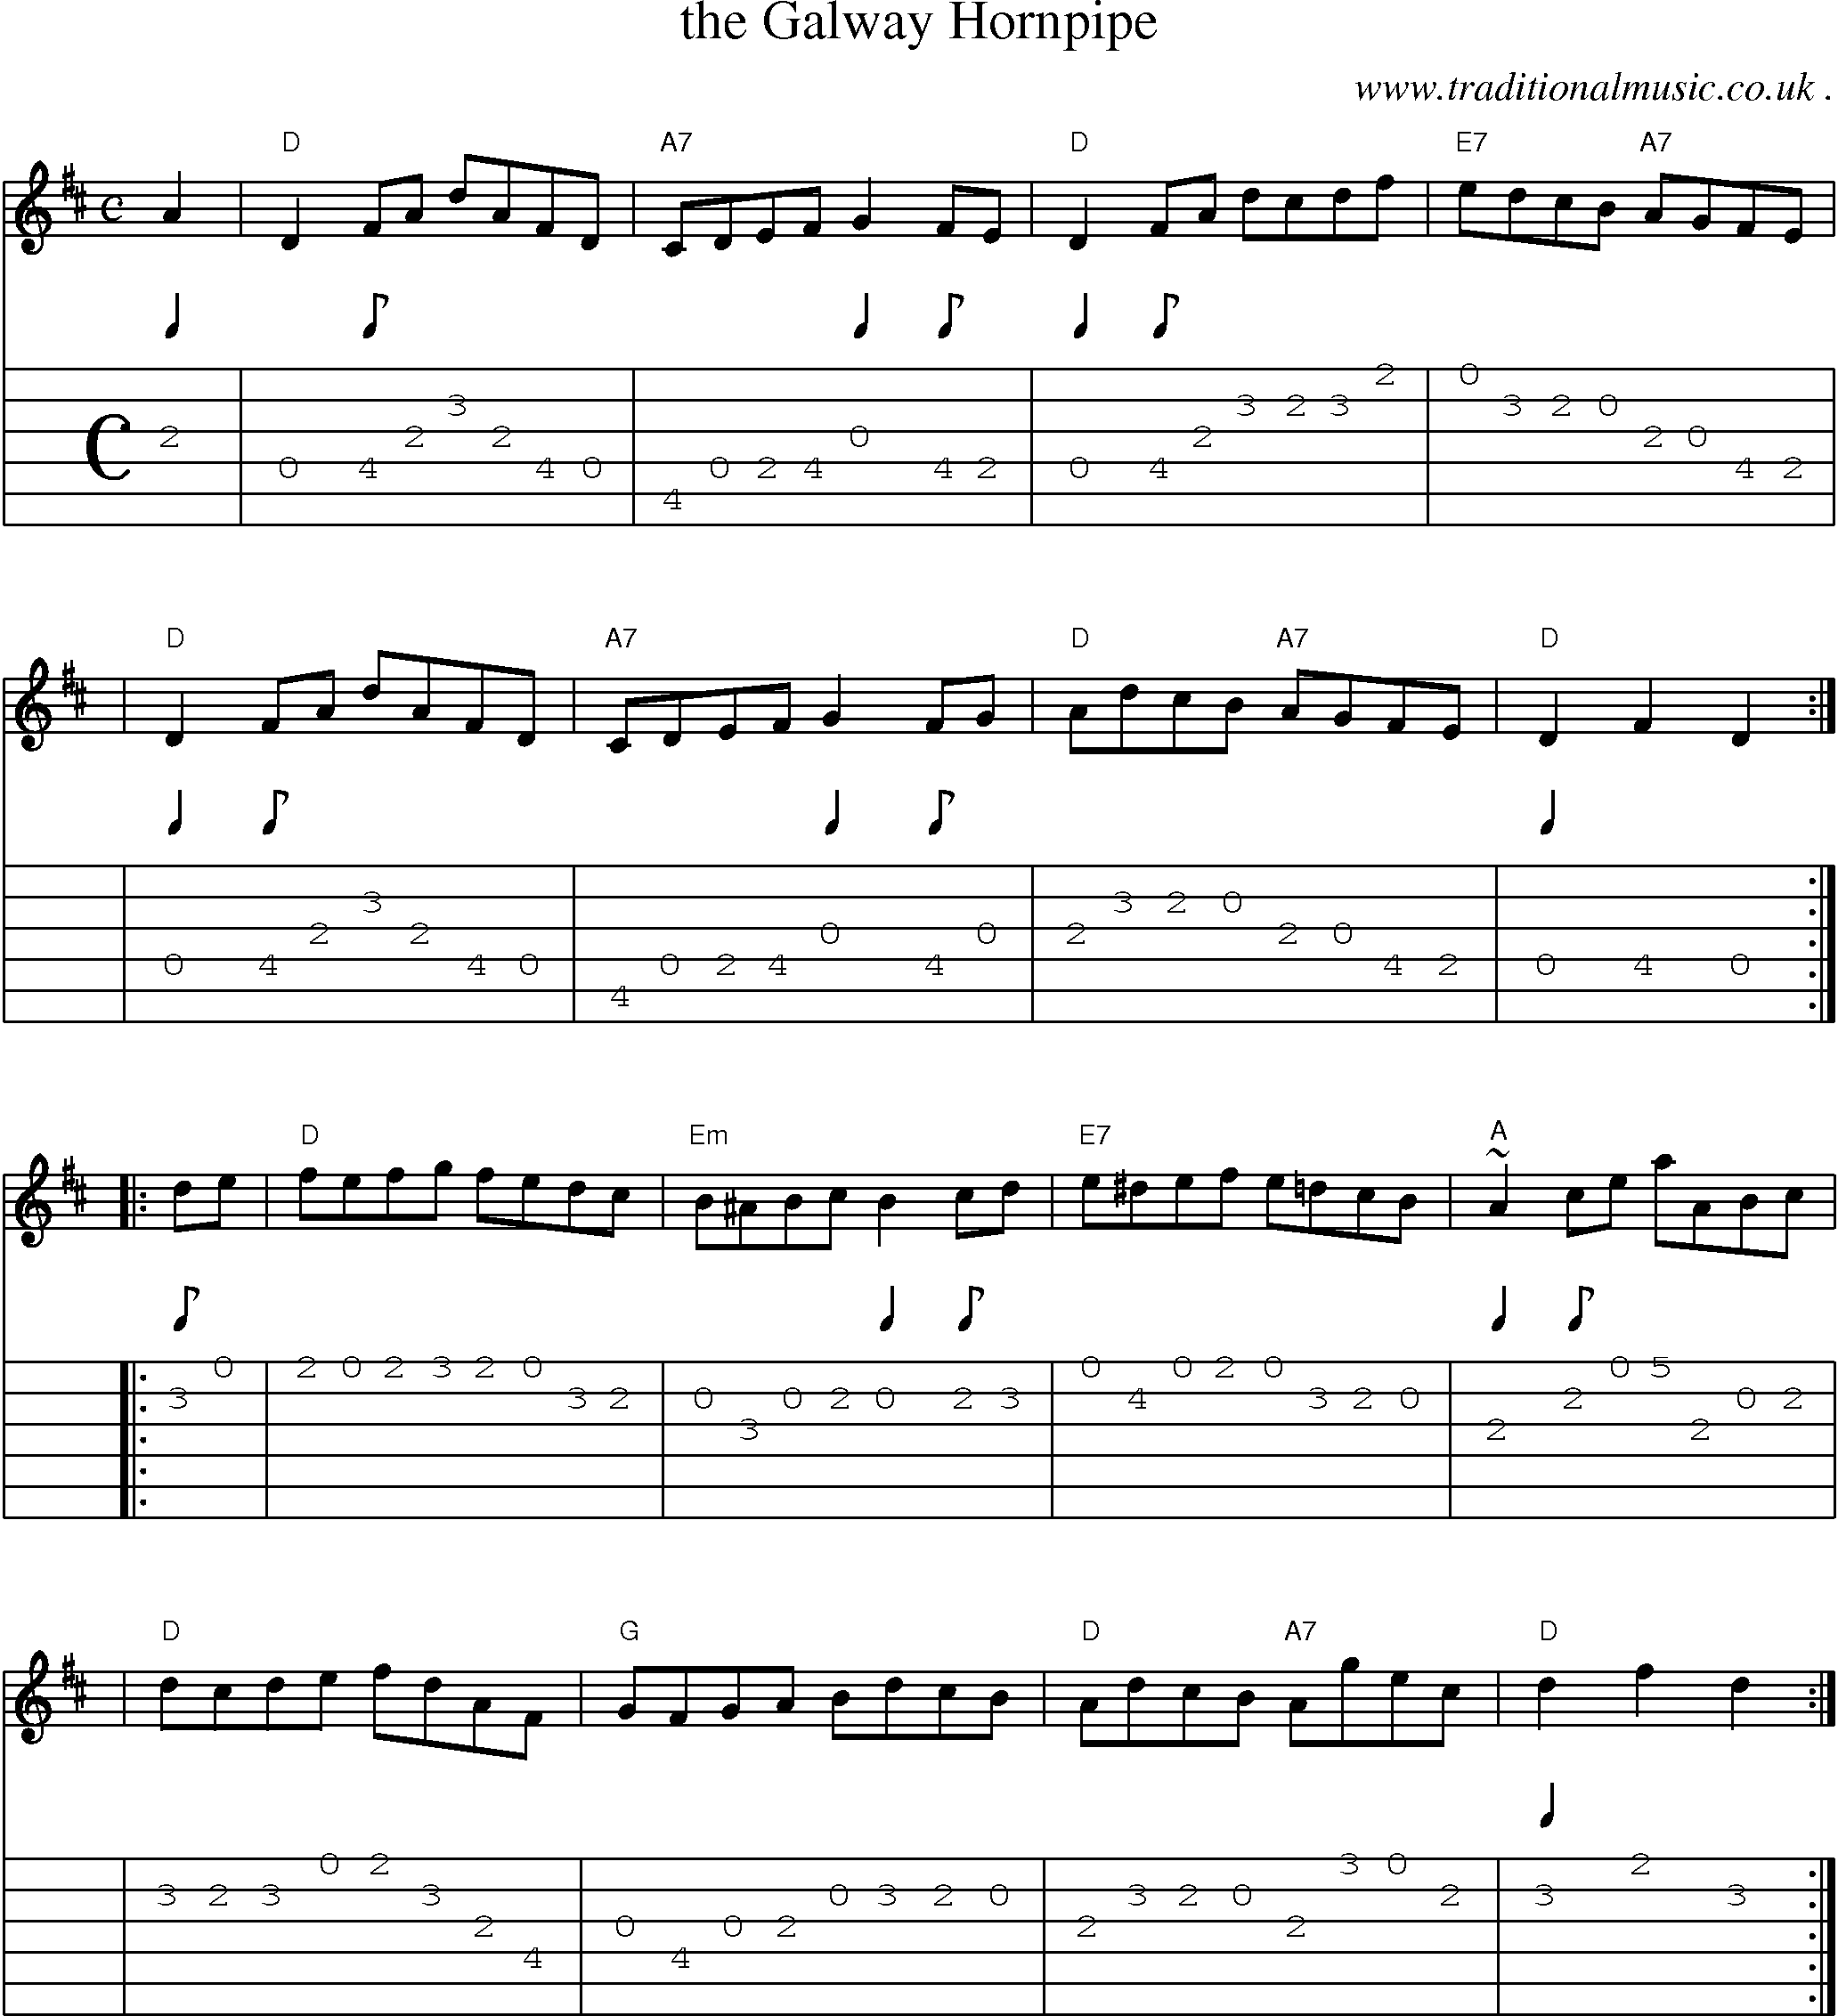 Sheet-music  score, Chords and Guitar Tabs for The Galway Hornpipe